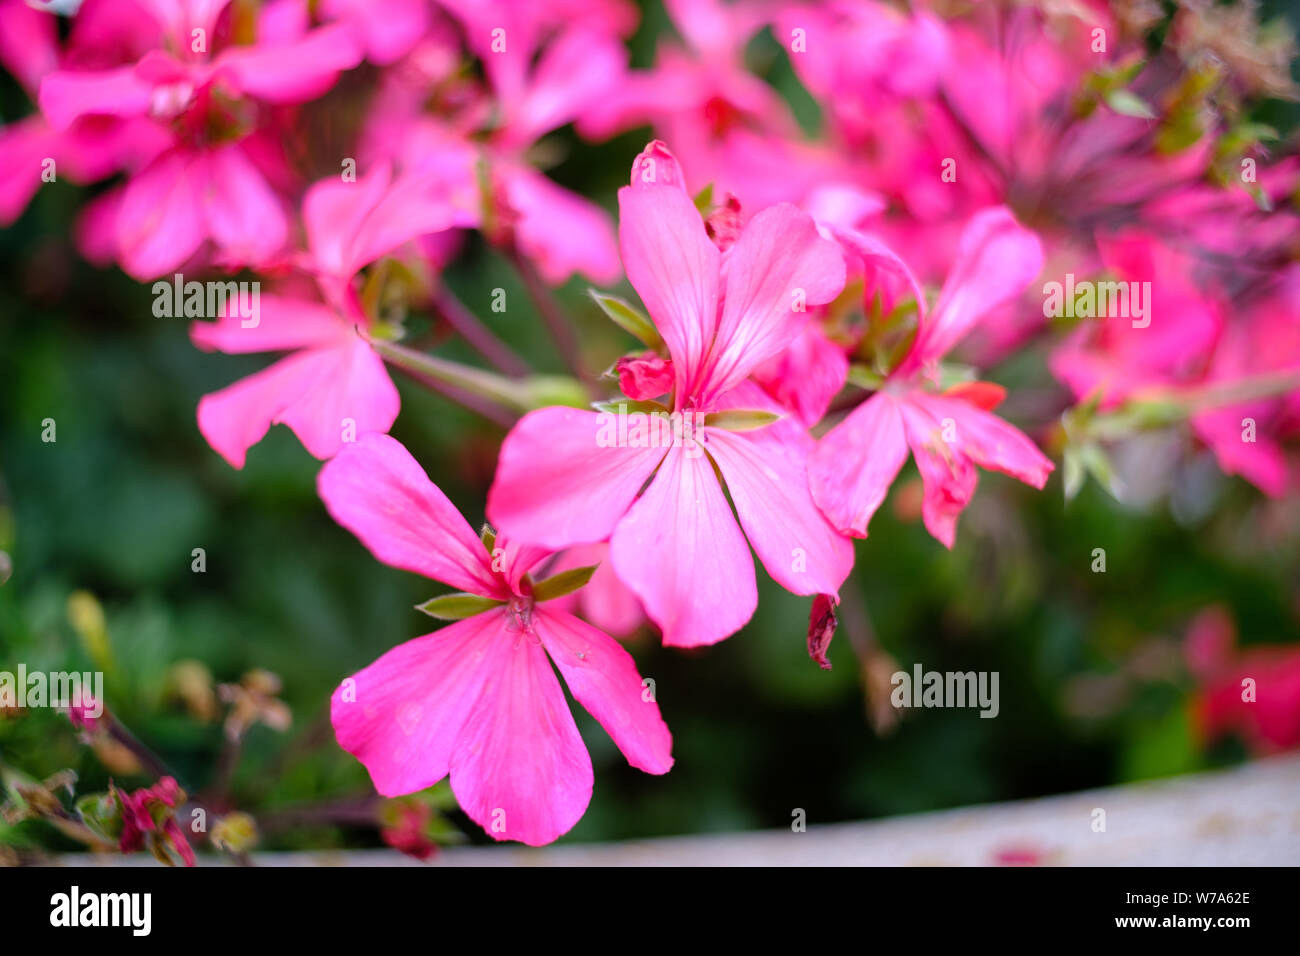 Closeup of pink flowers with a soft background. Stock Photo